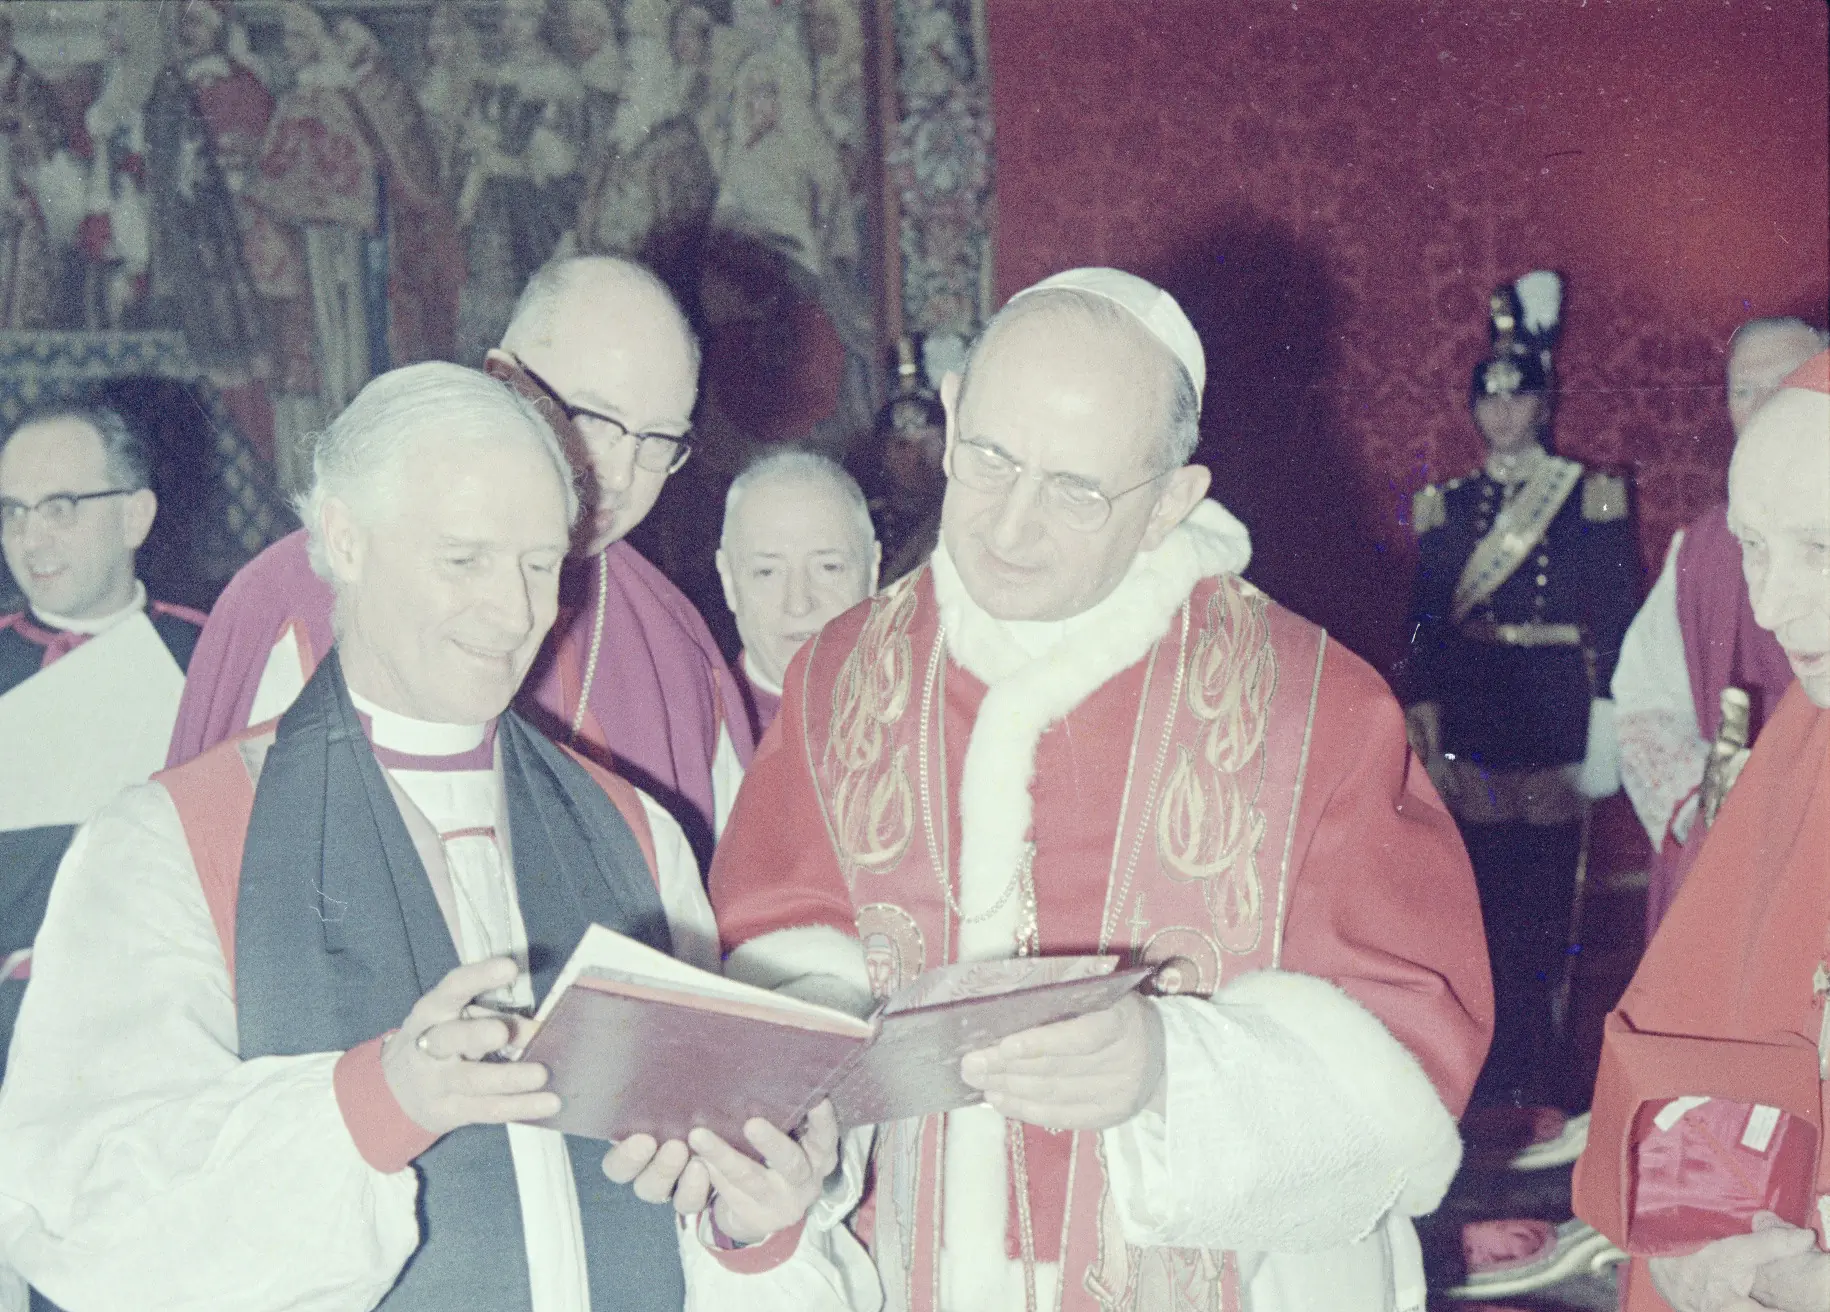 Bishop John Moorman, leader of the Anglican delegation at the Second Vatican Council, examines a book with Pope Paul VI. Archbishop Jan Willebrands peers over Moorman's shoulder, while Cardinal Augustin Bea watches from the pope's side